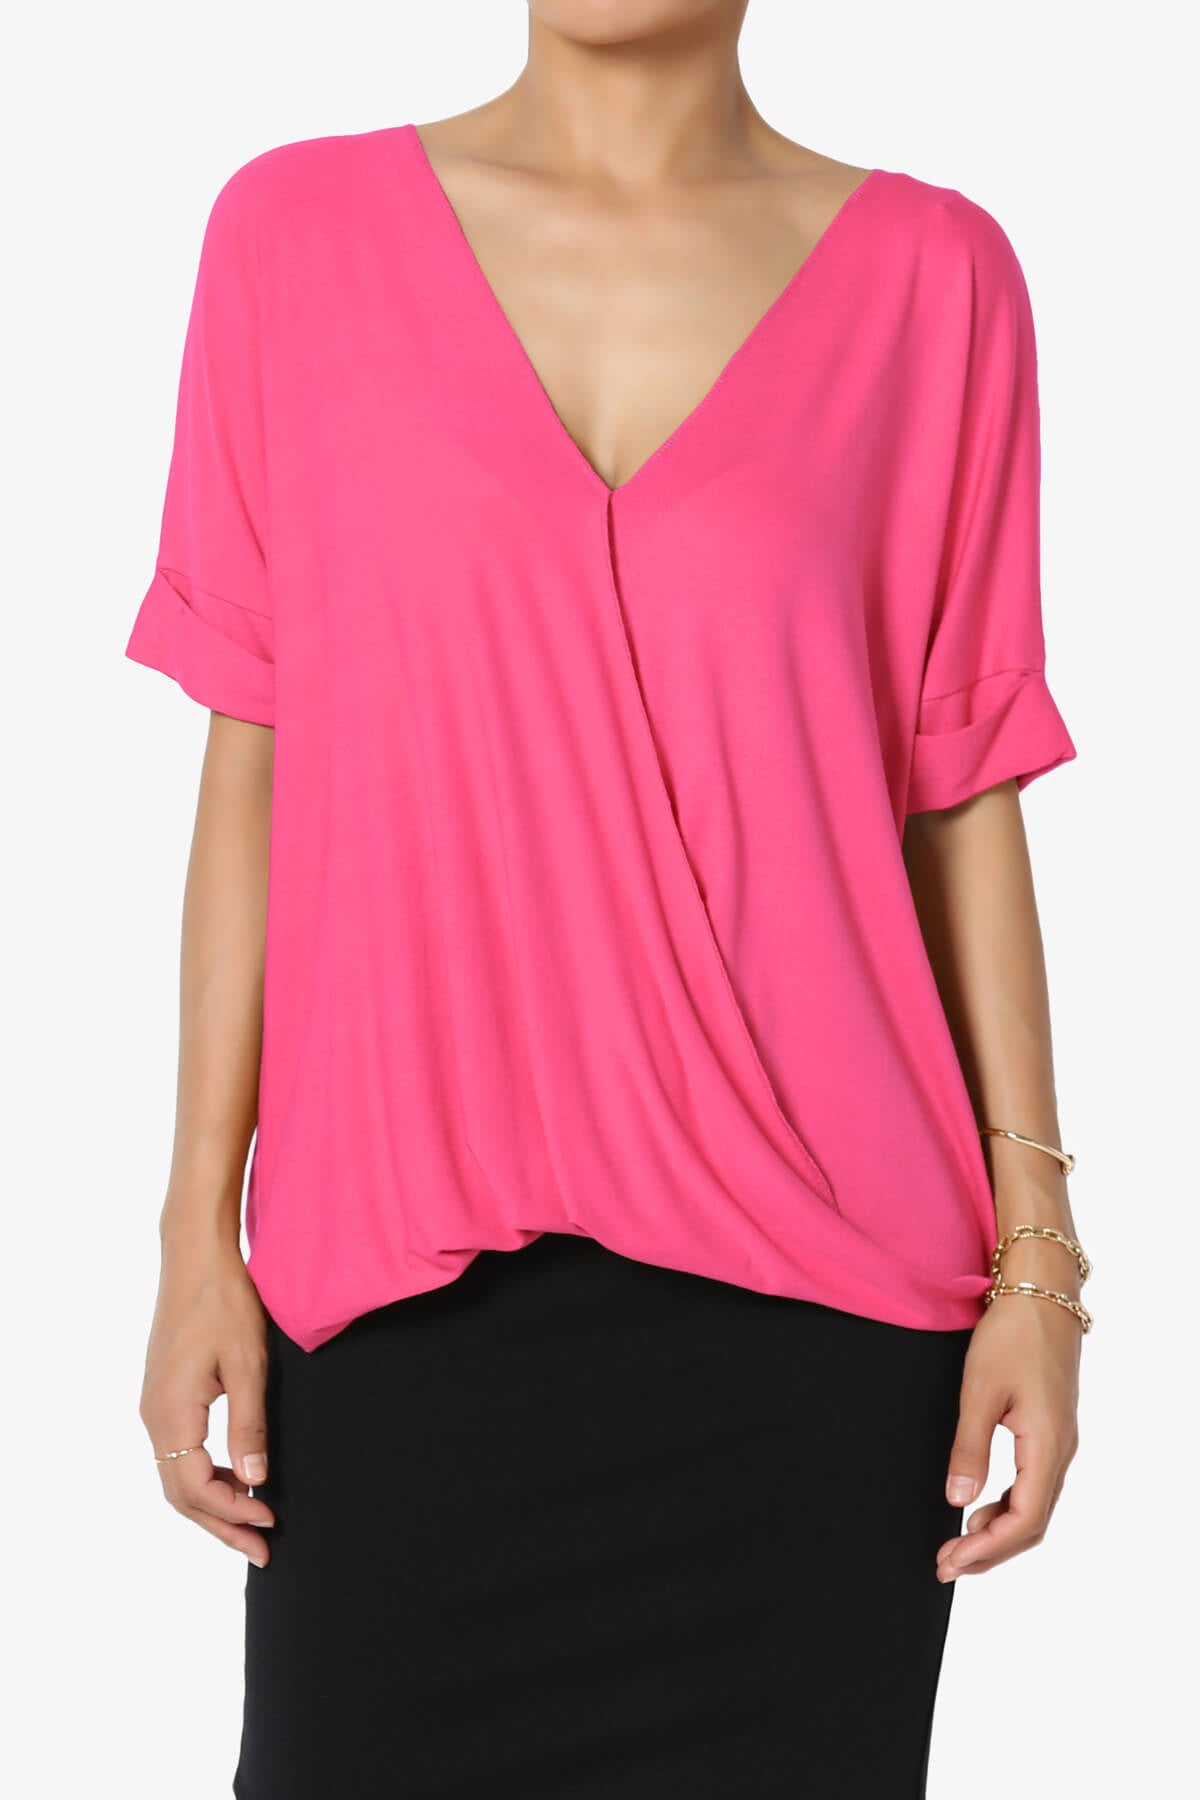 Load image into Gallery viewer, Tackle Wrap Hi-Low Crepe Knit Top FUCHSIA_1
